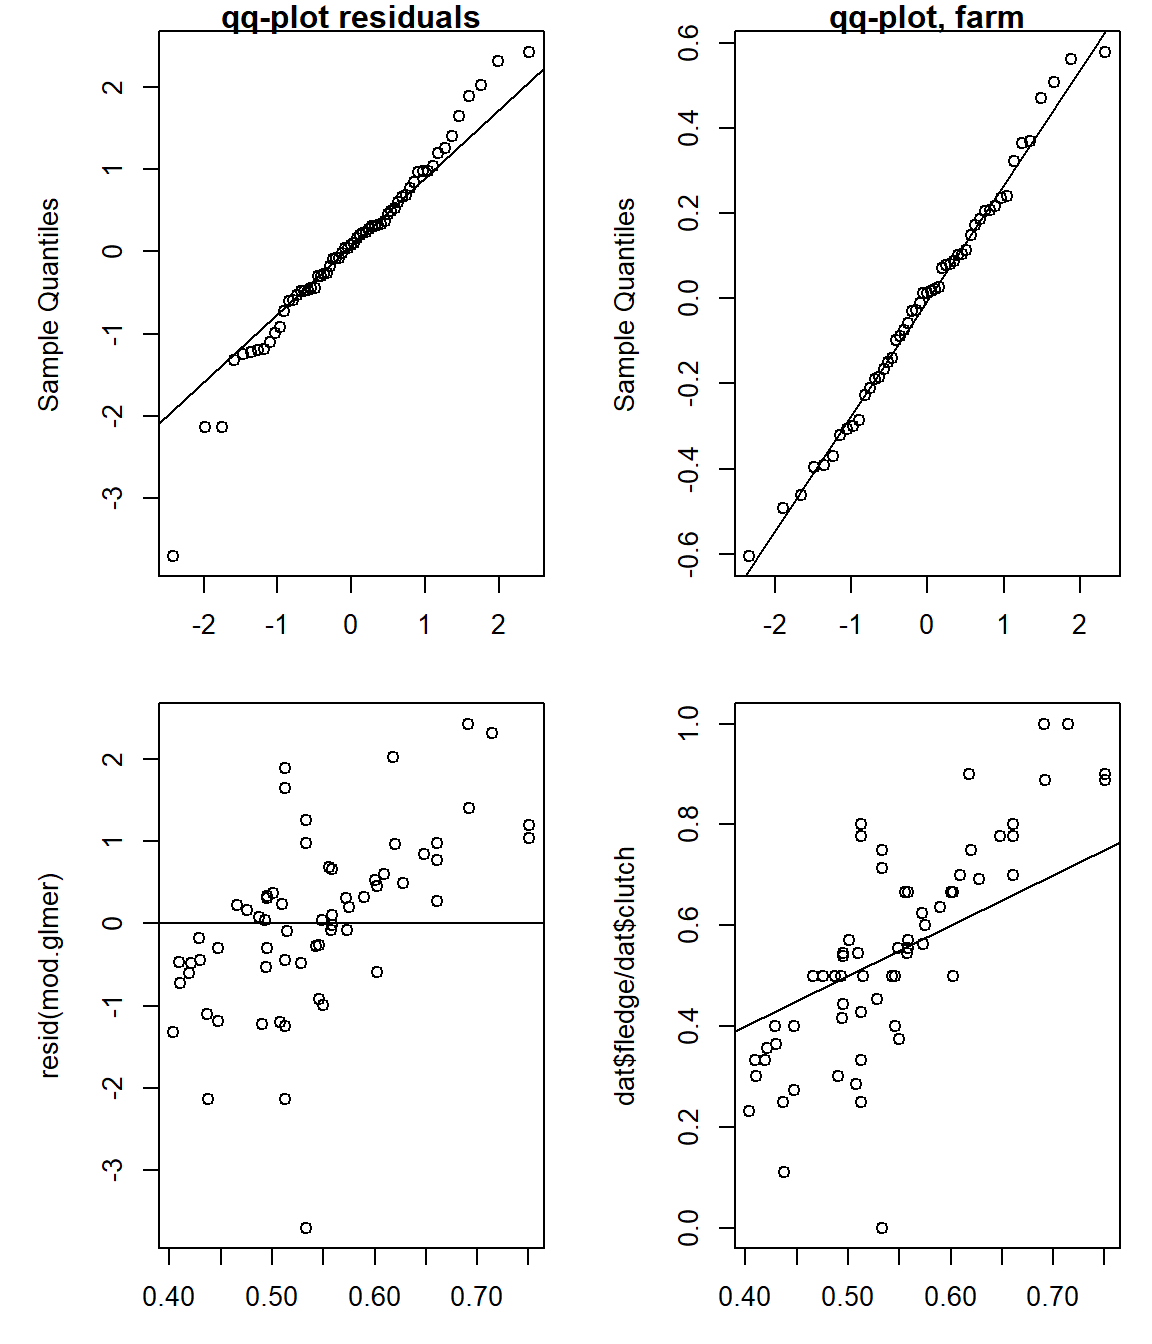 Diagnostic plots to assess model assumptions for mod.glmer. Uppper left: quantile-quantile plot of the residuals vs. theoretical quantiles of the normal distribution. Upper rihgt: quantile-quantile plot of the random effects "farm". Lower left: residuals vs. fitted values. Lower right: observed vs. fitted values.